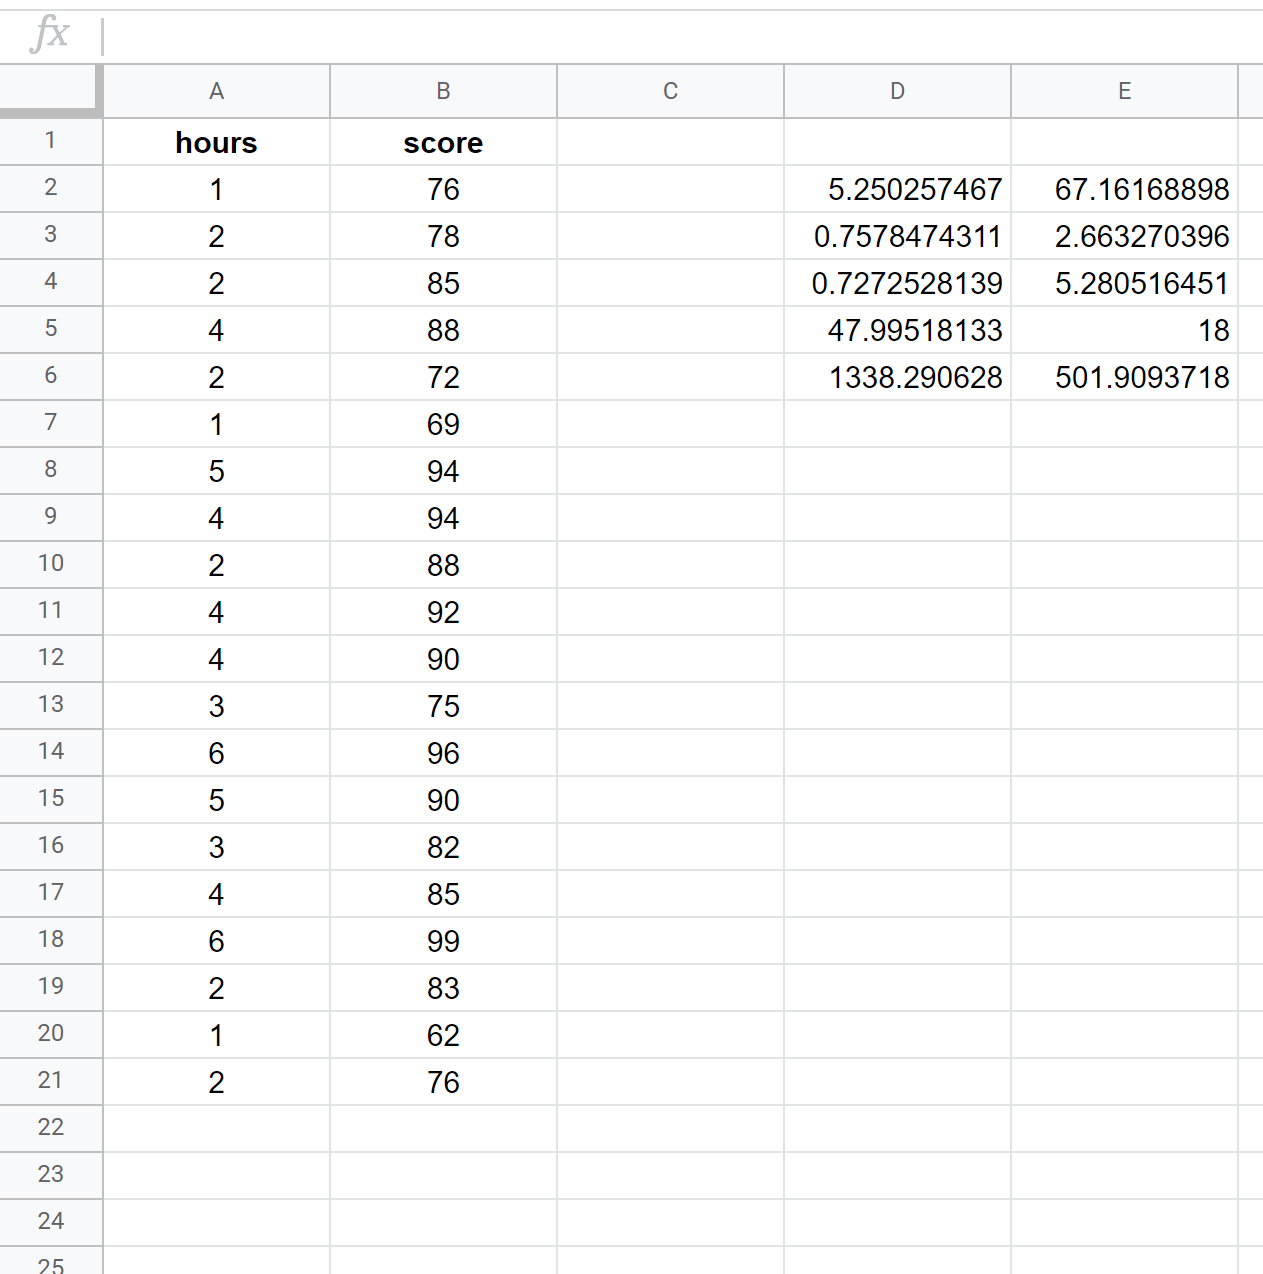 Linear regression in Google Sheets